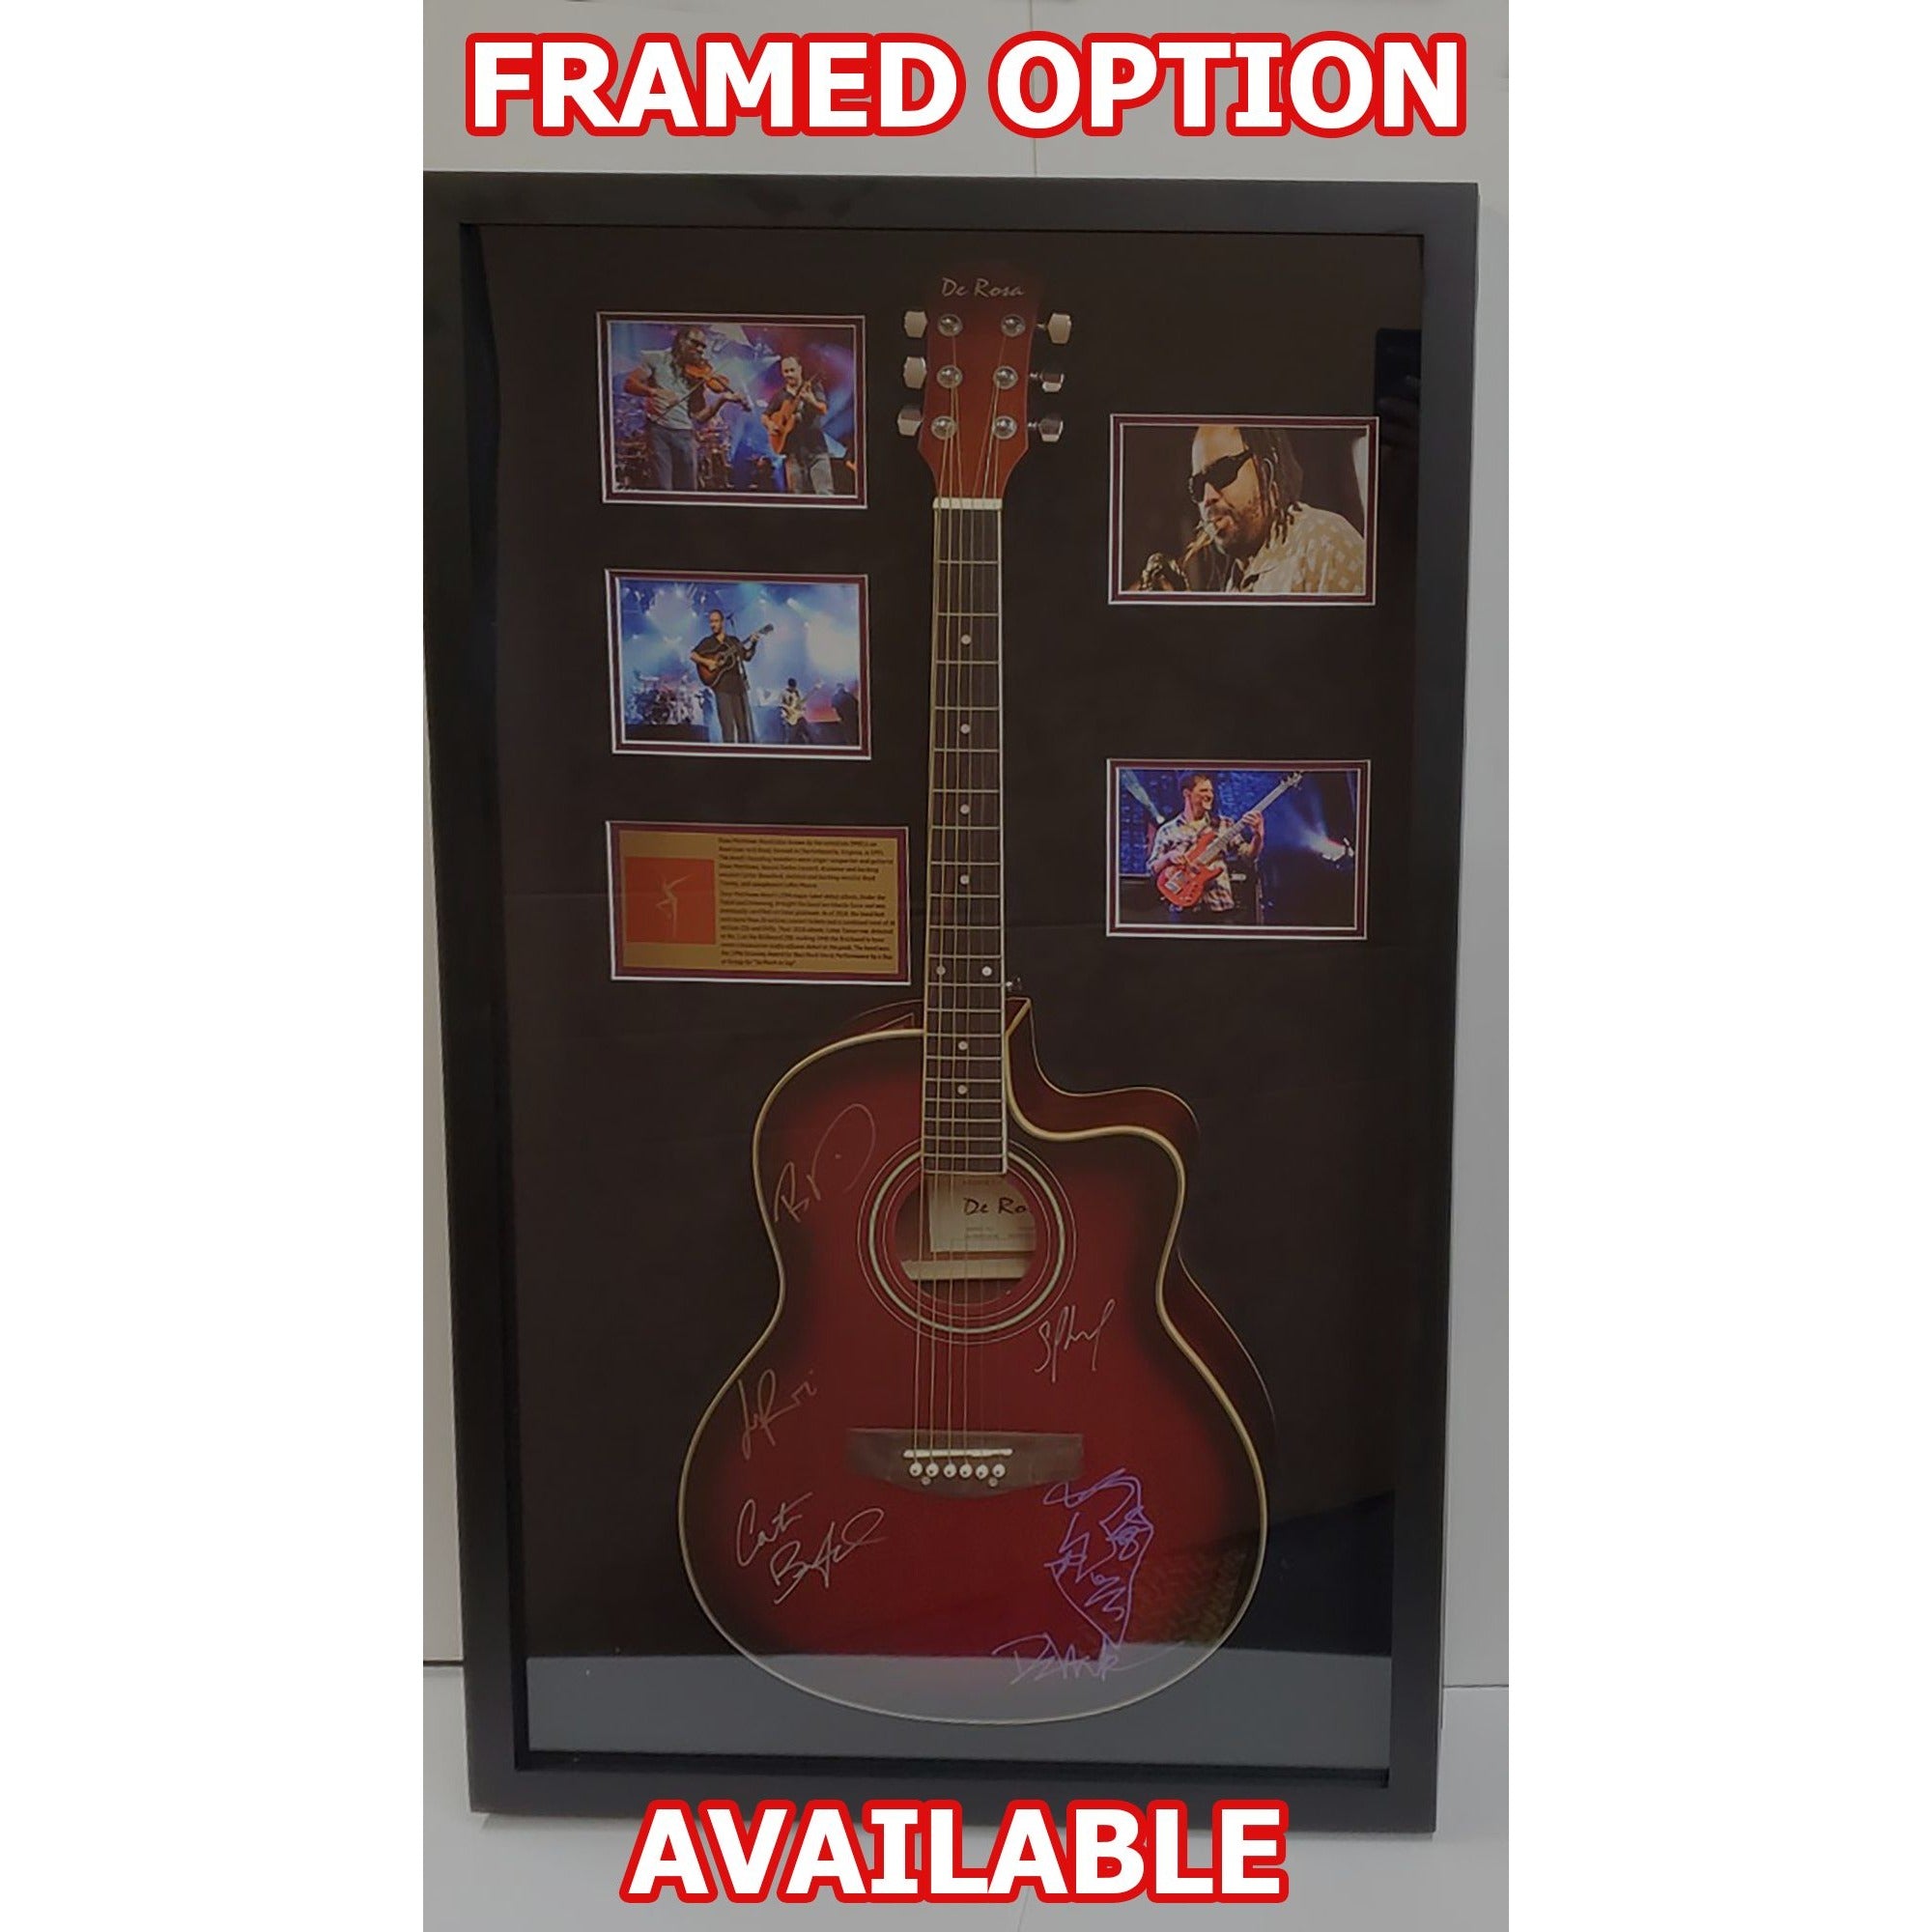 Jimmy Buffett 38' inch full size acoustic guitar signed with sketch from Jimmy